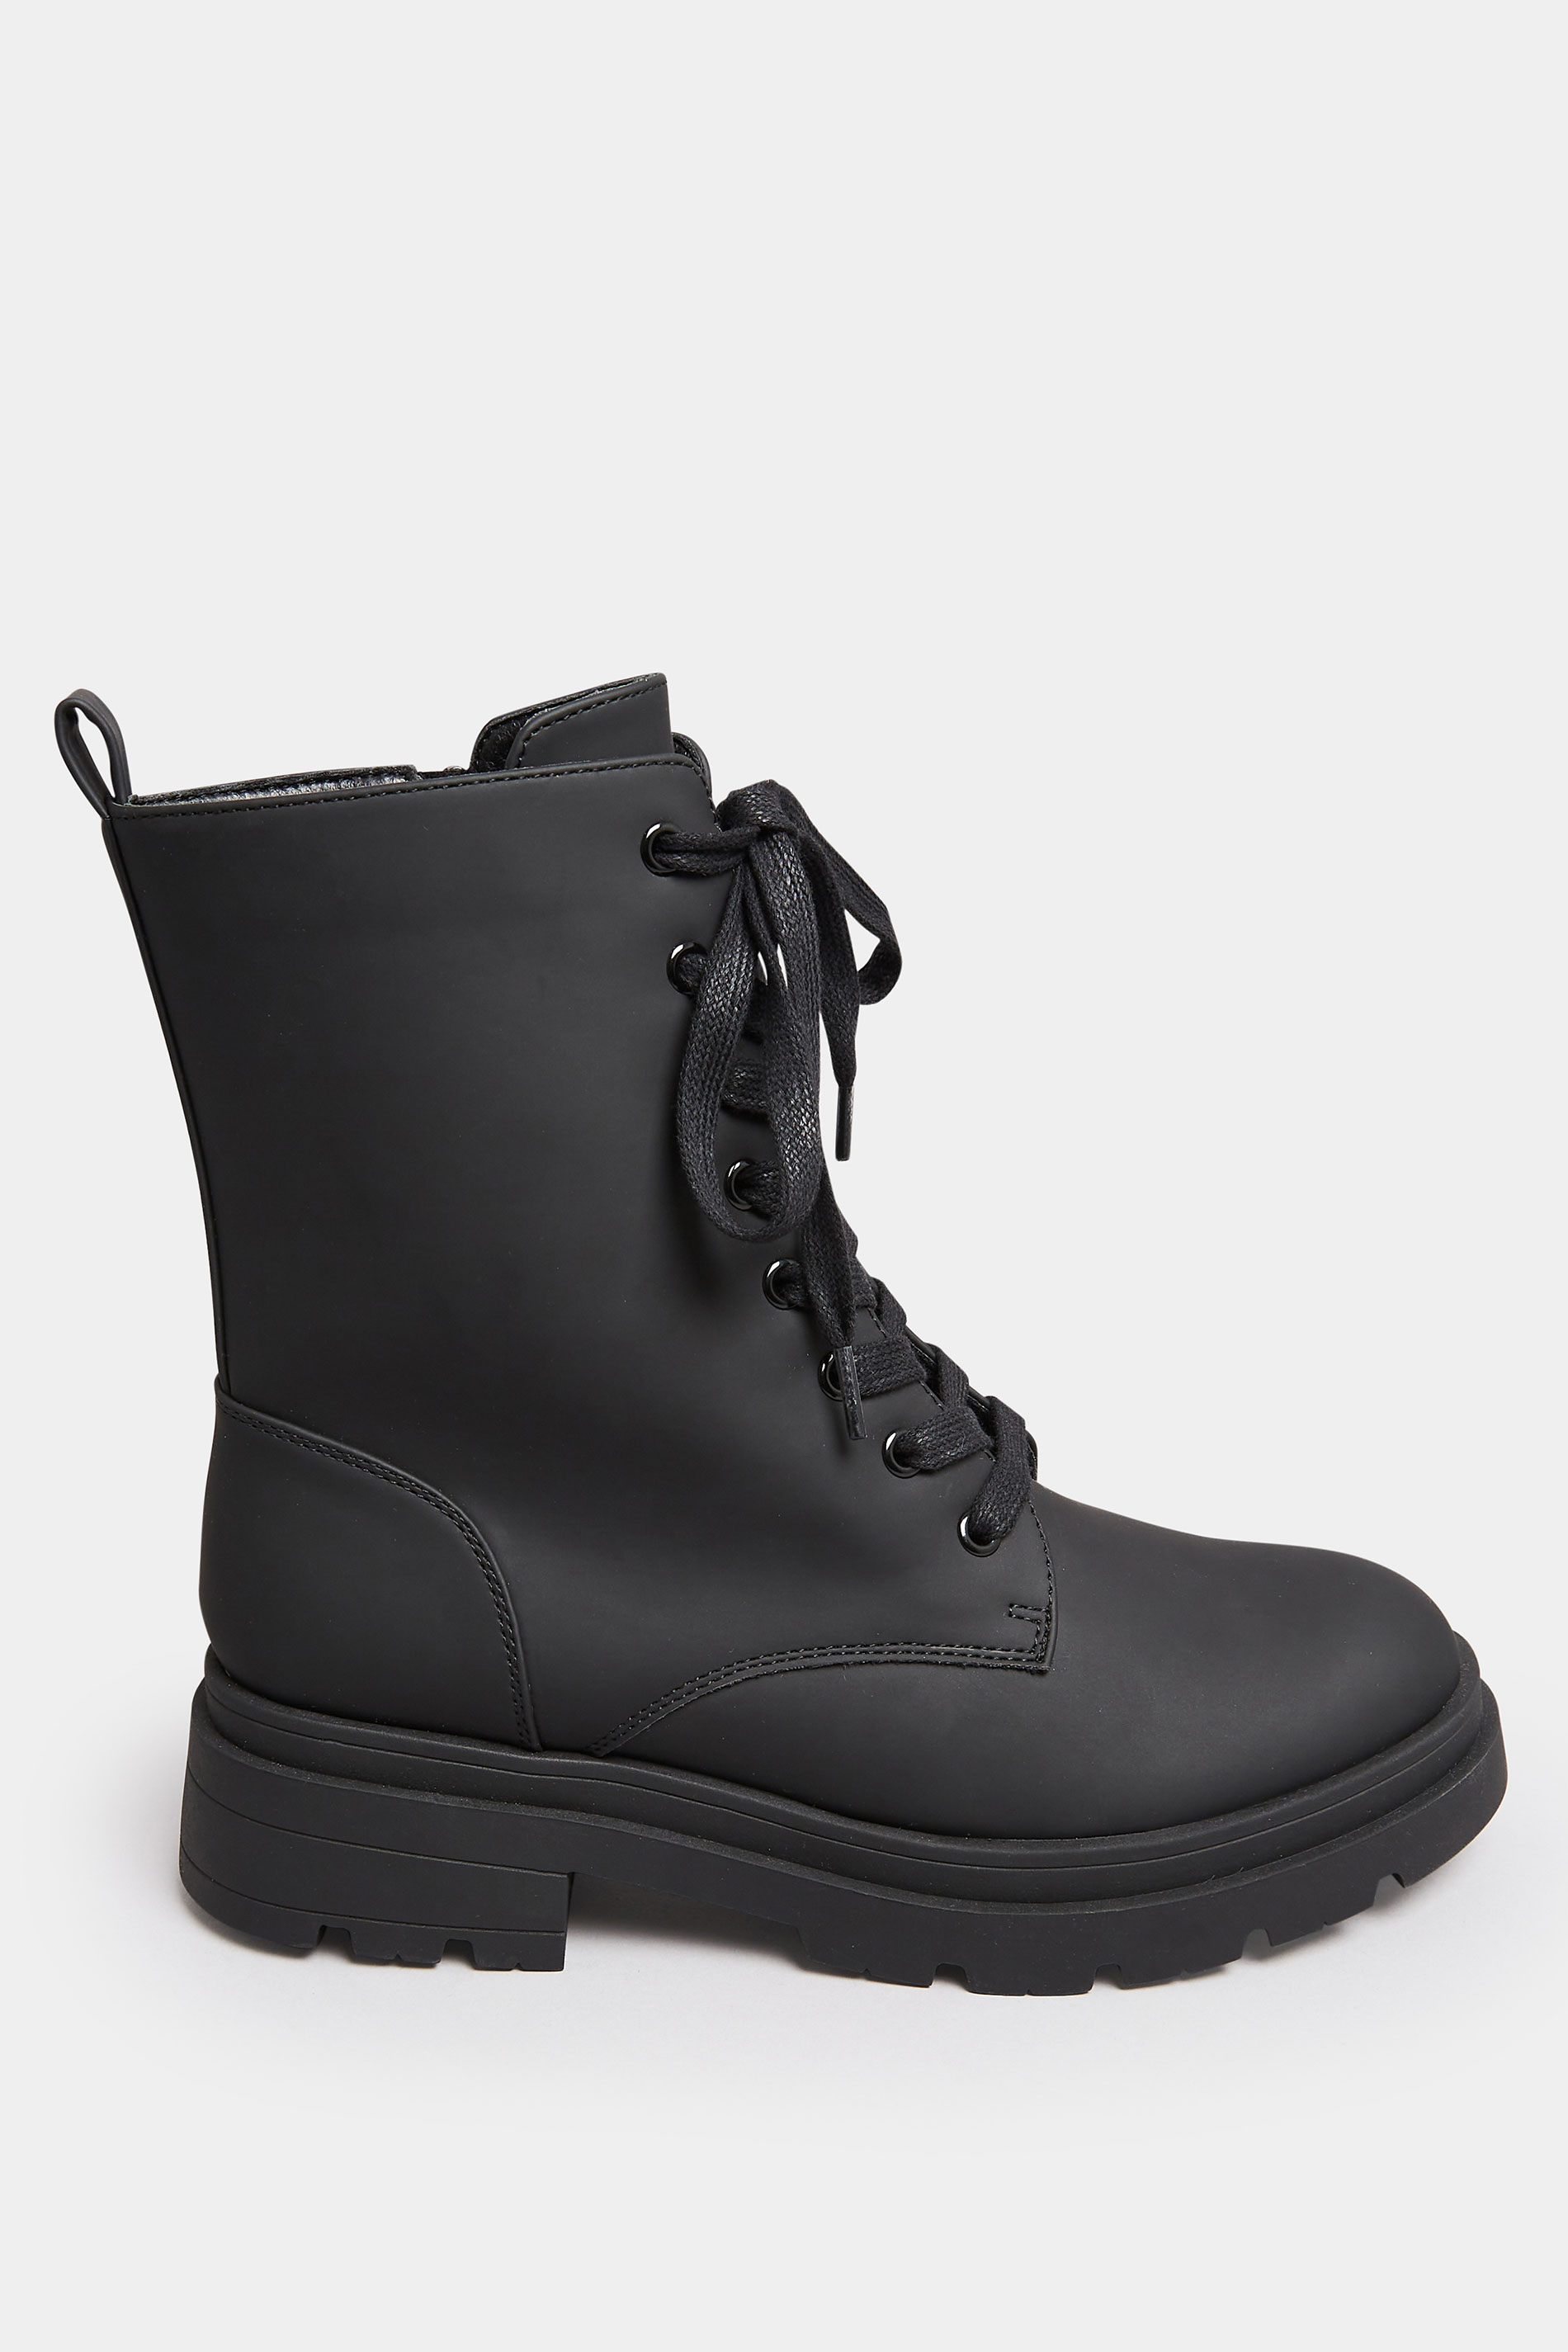 LIMITED COLLECTION Black Chunky Lace Up Boots In Wide E Fit & Extra Wide EEE Fit | Yours Clothing 3